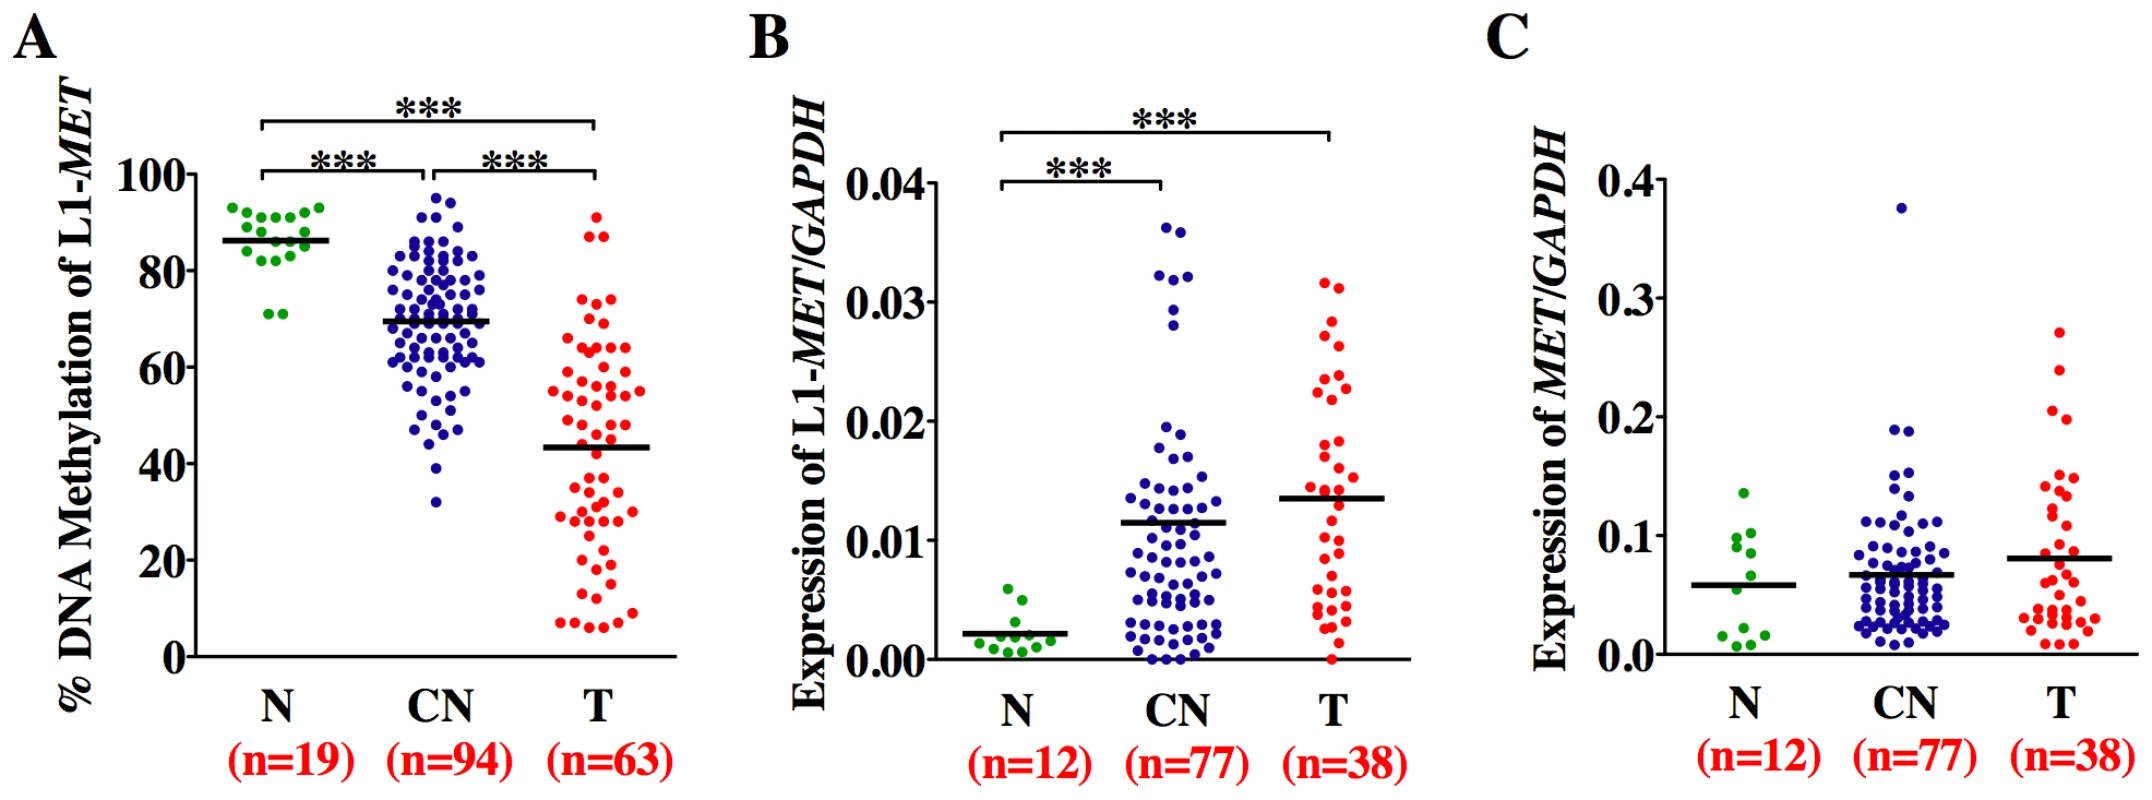 Methylation and expression status of L1-<i>MET</i> correlates in bladder tissues.